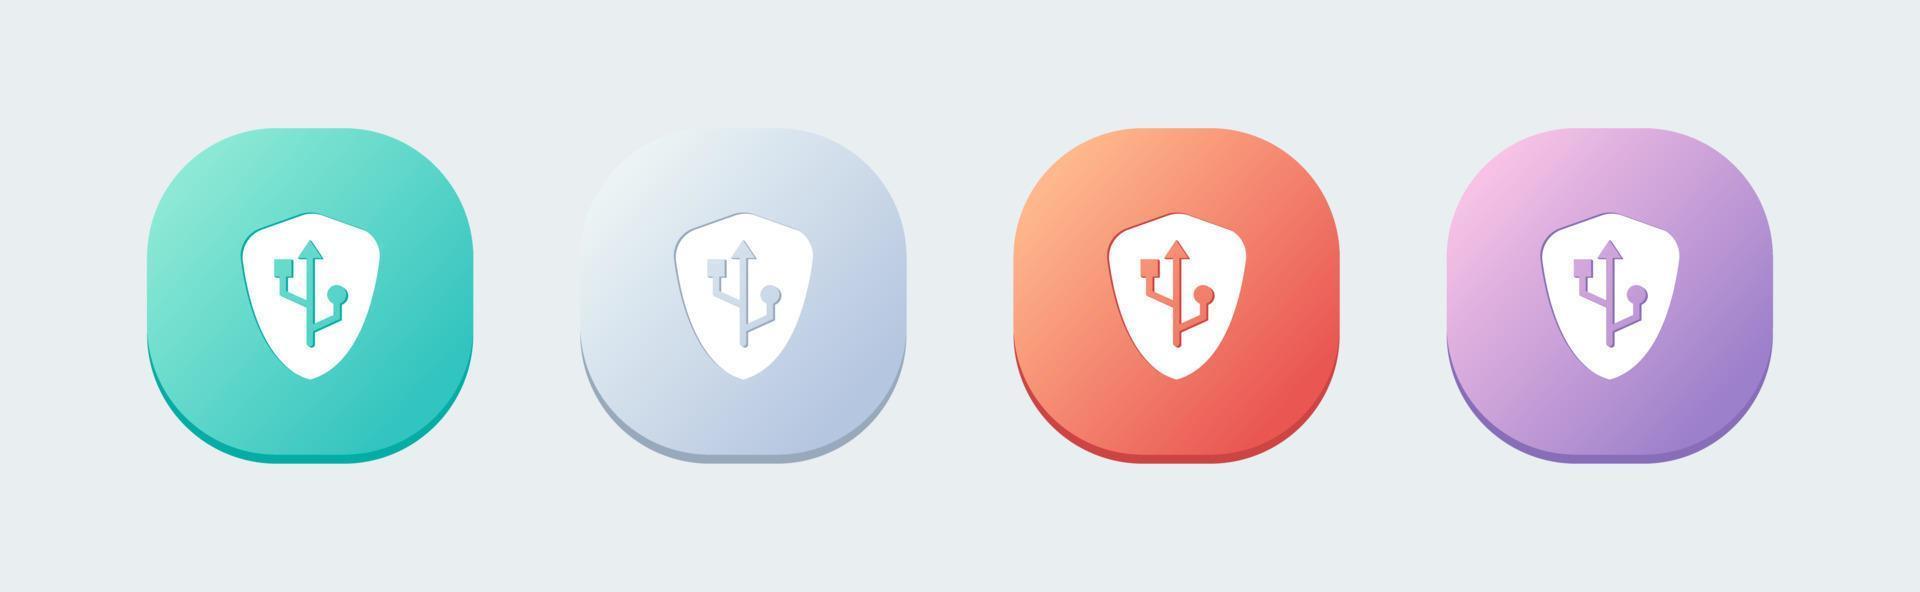 Secure usb solid icon in flat design style. Data transfer signs vector illustration.